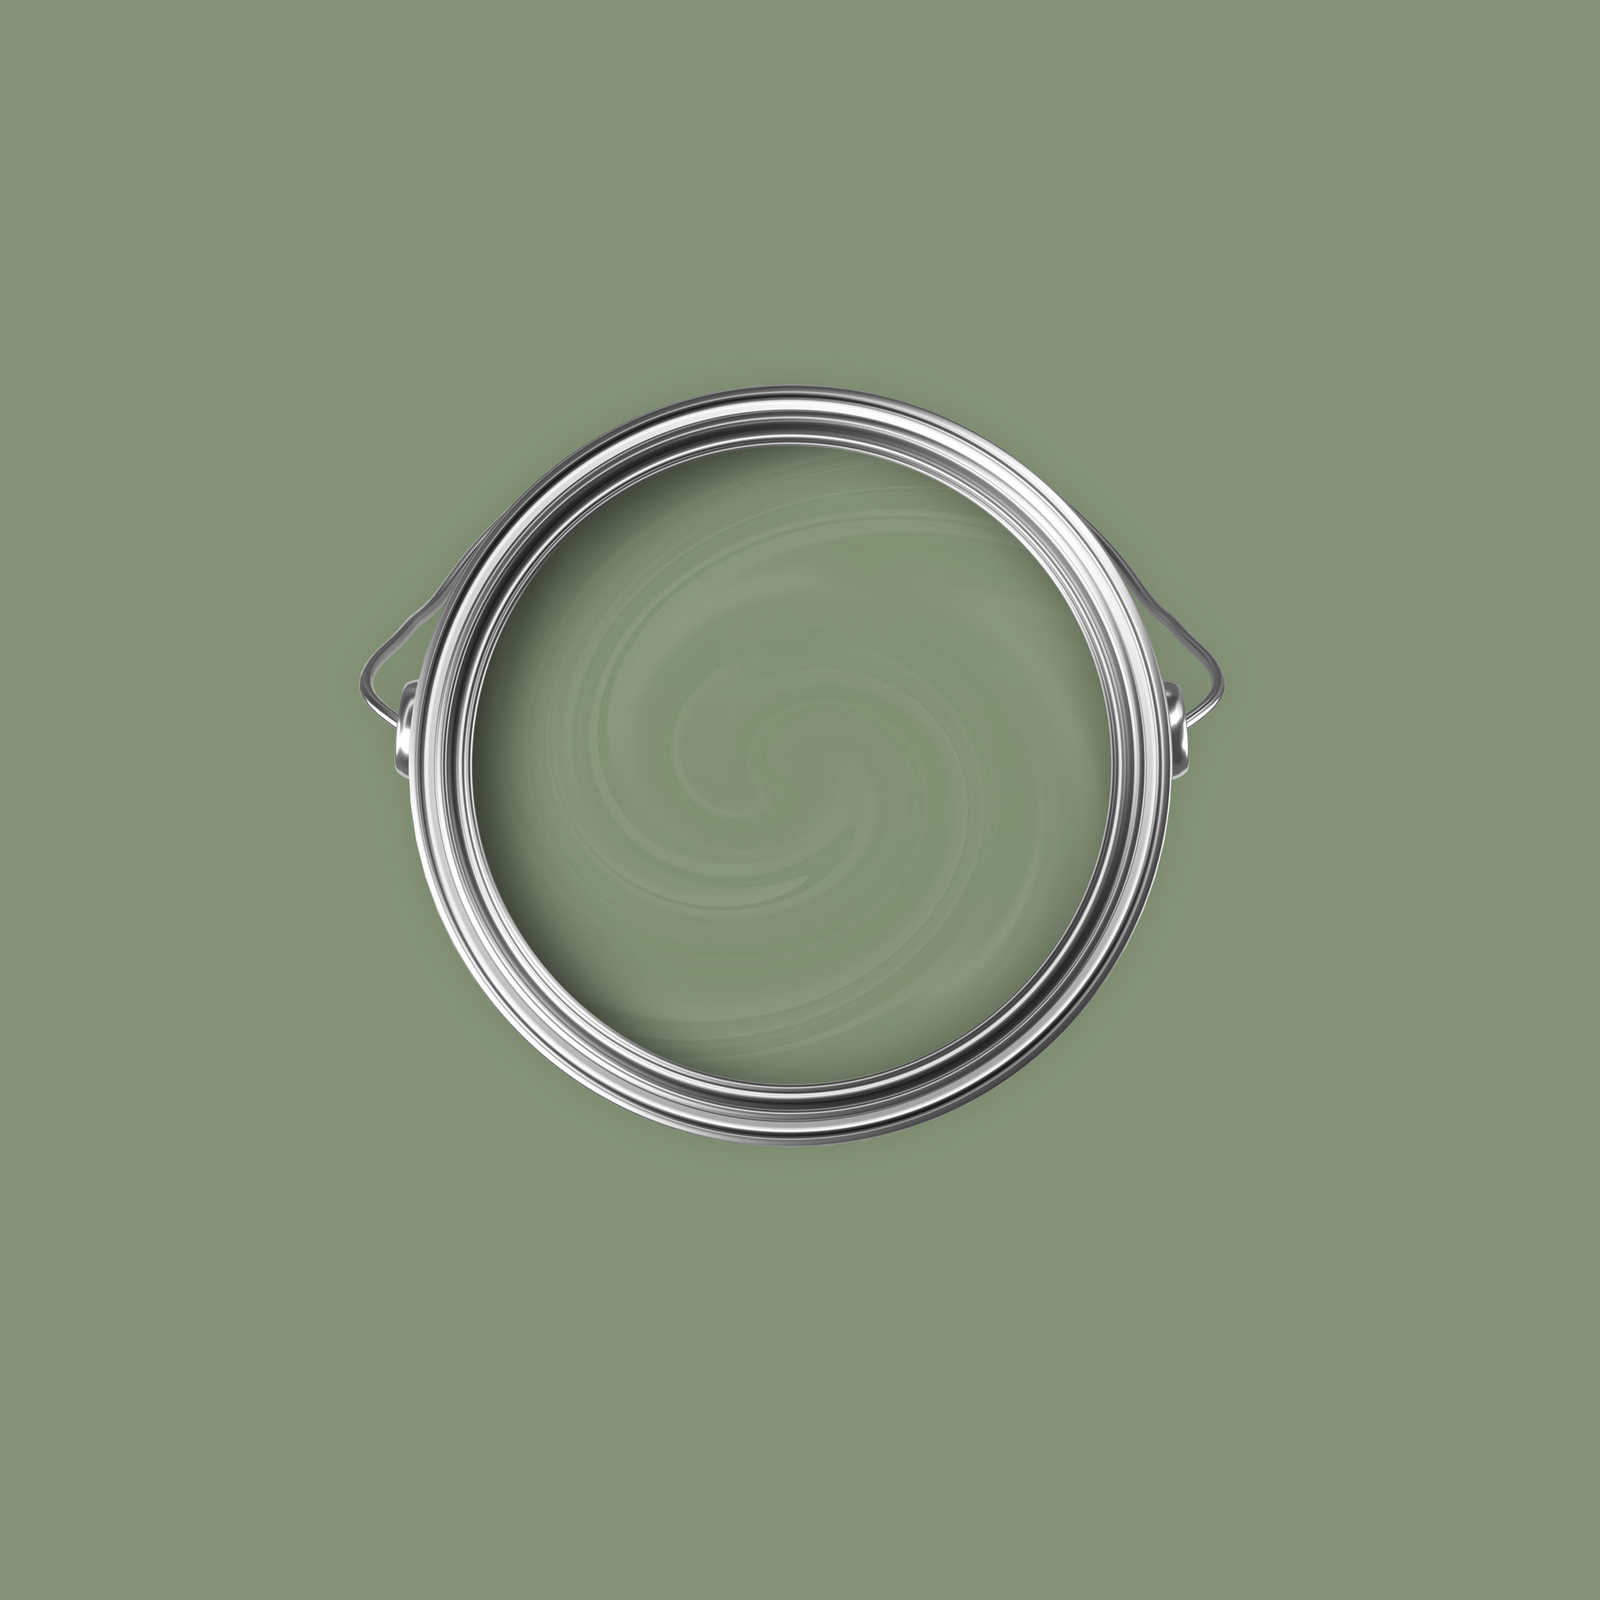             Premium Wall Paint Nature Olive Green »Gorgeous Green« NW503 – 2.5 litre
        